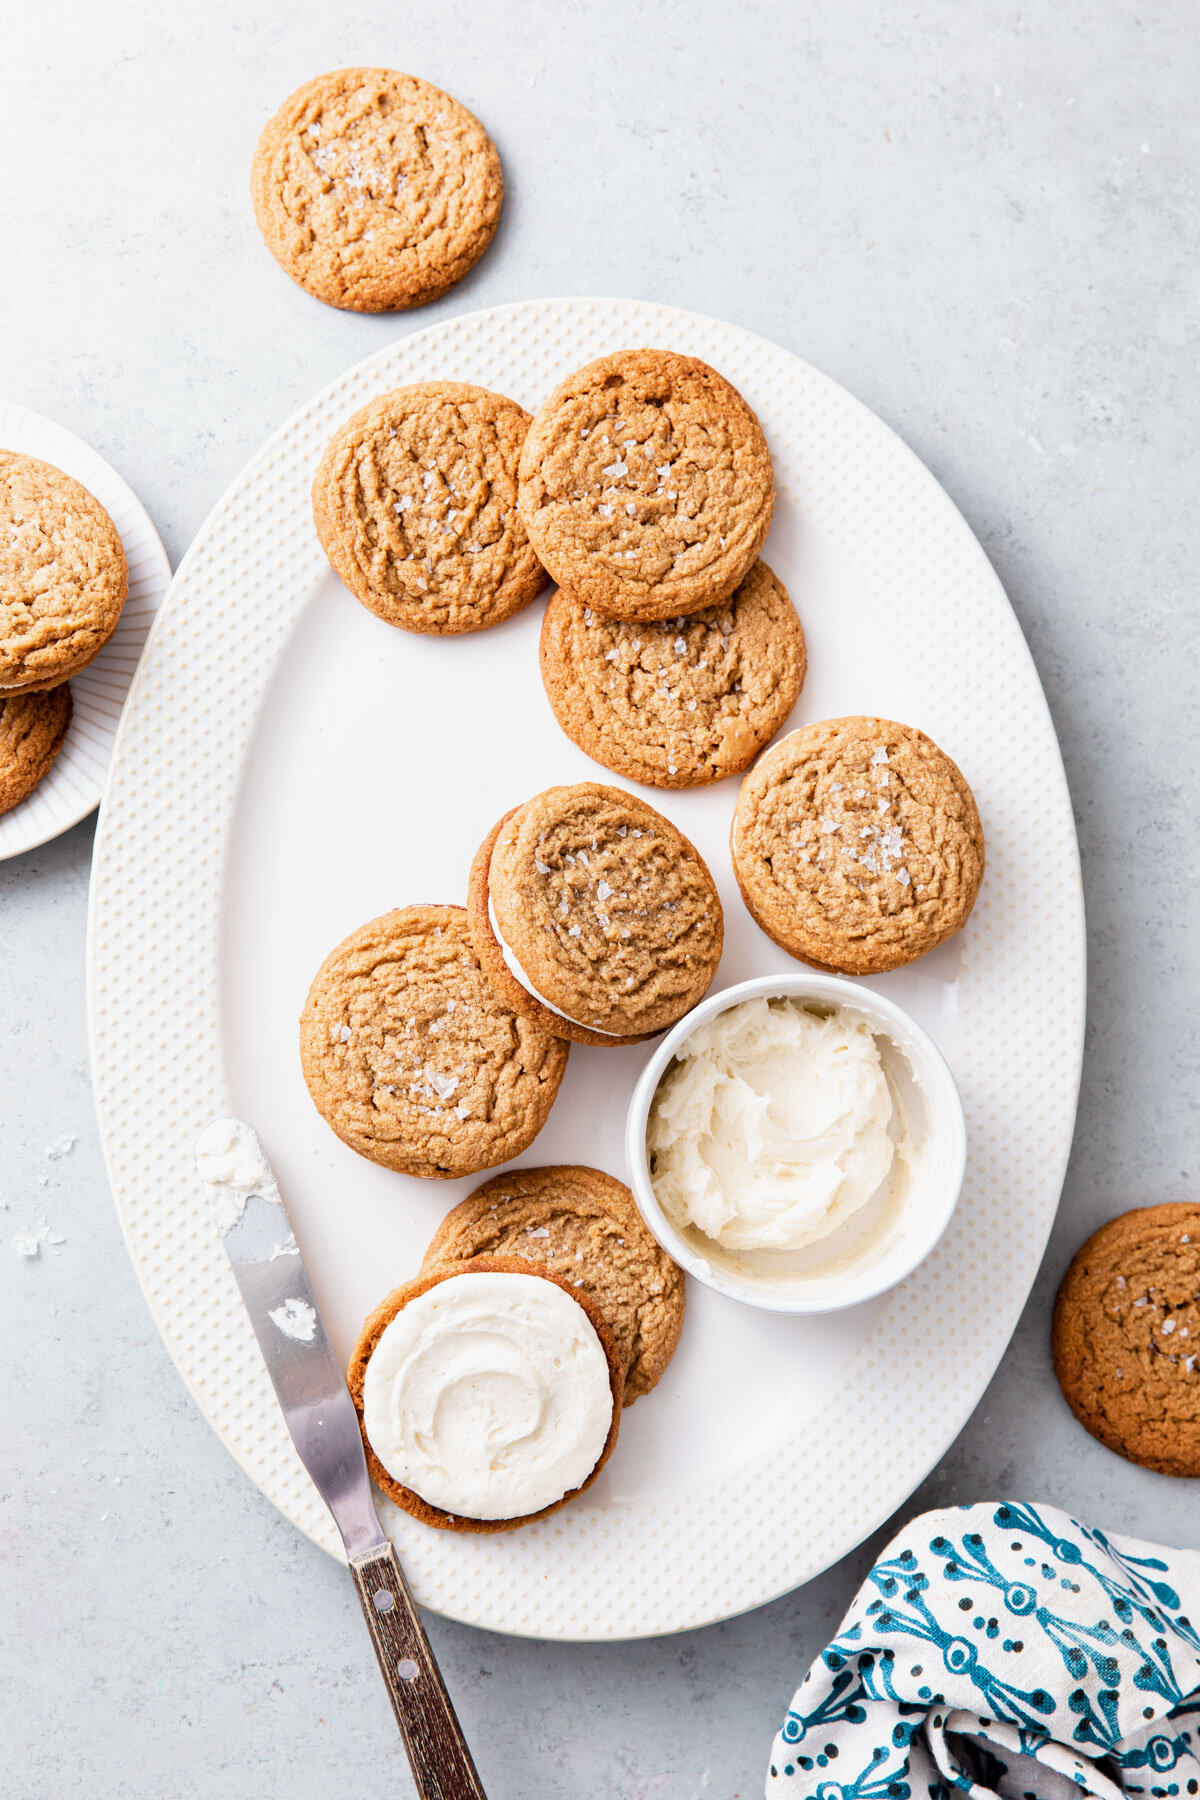 Assembling Flourless Peanut Butter Cookies and spreading on whipped vanilla frosting filling